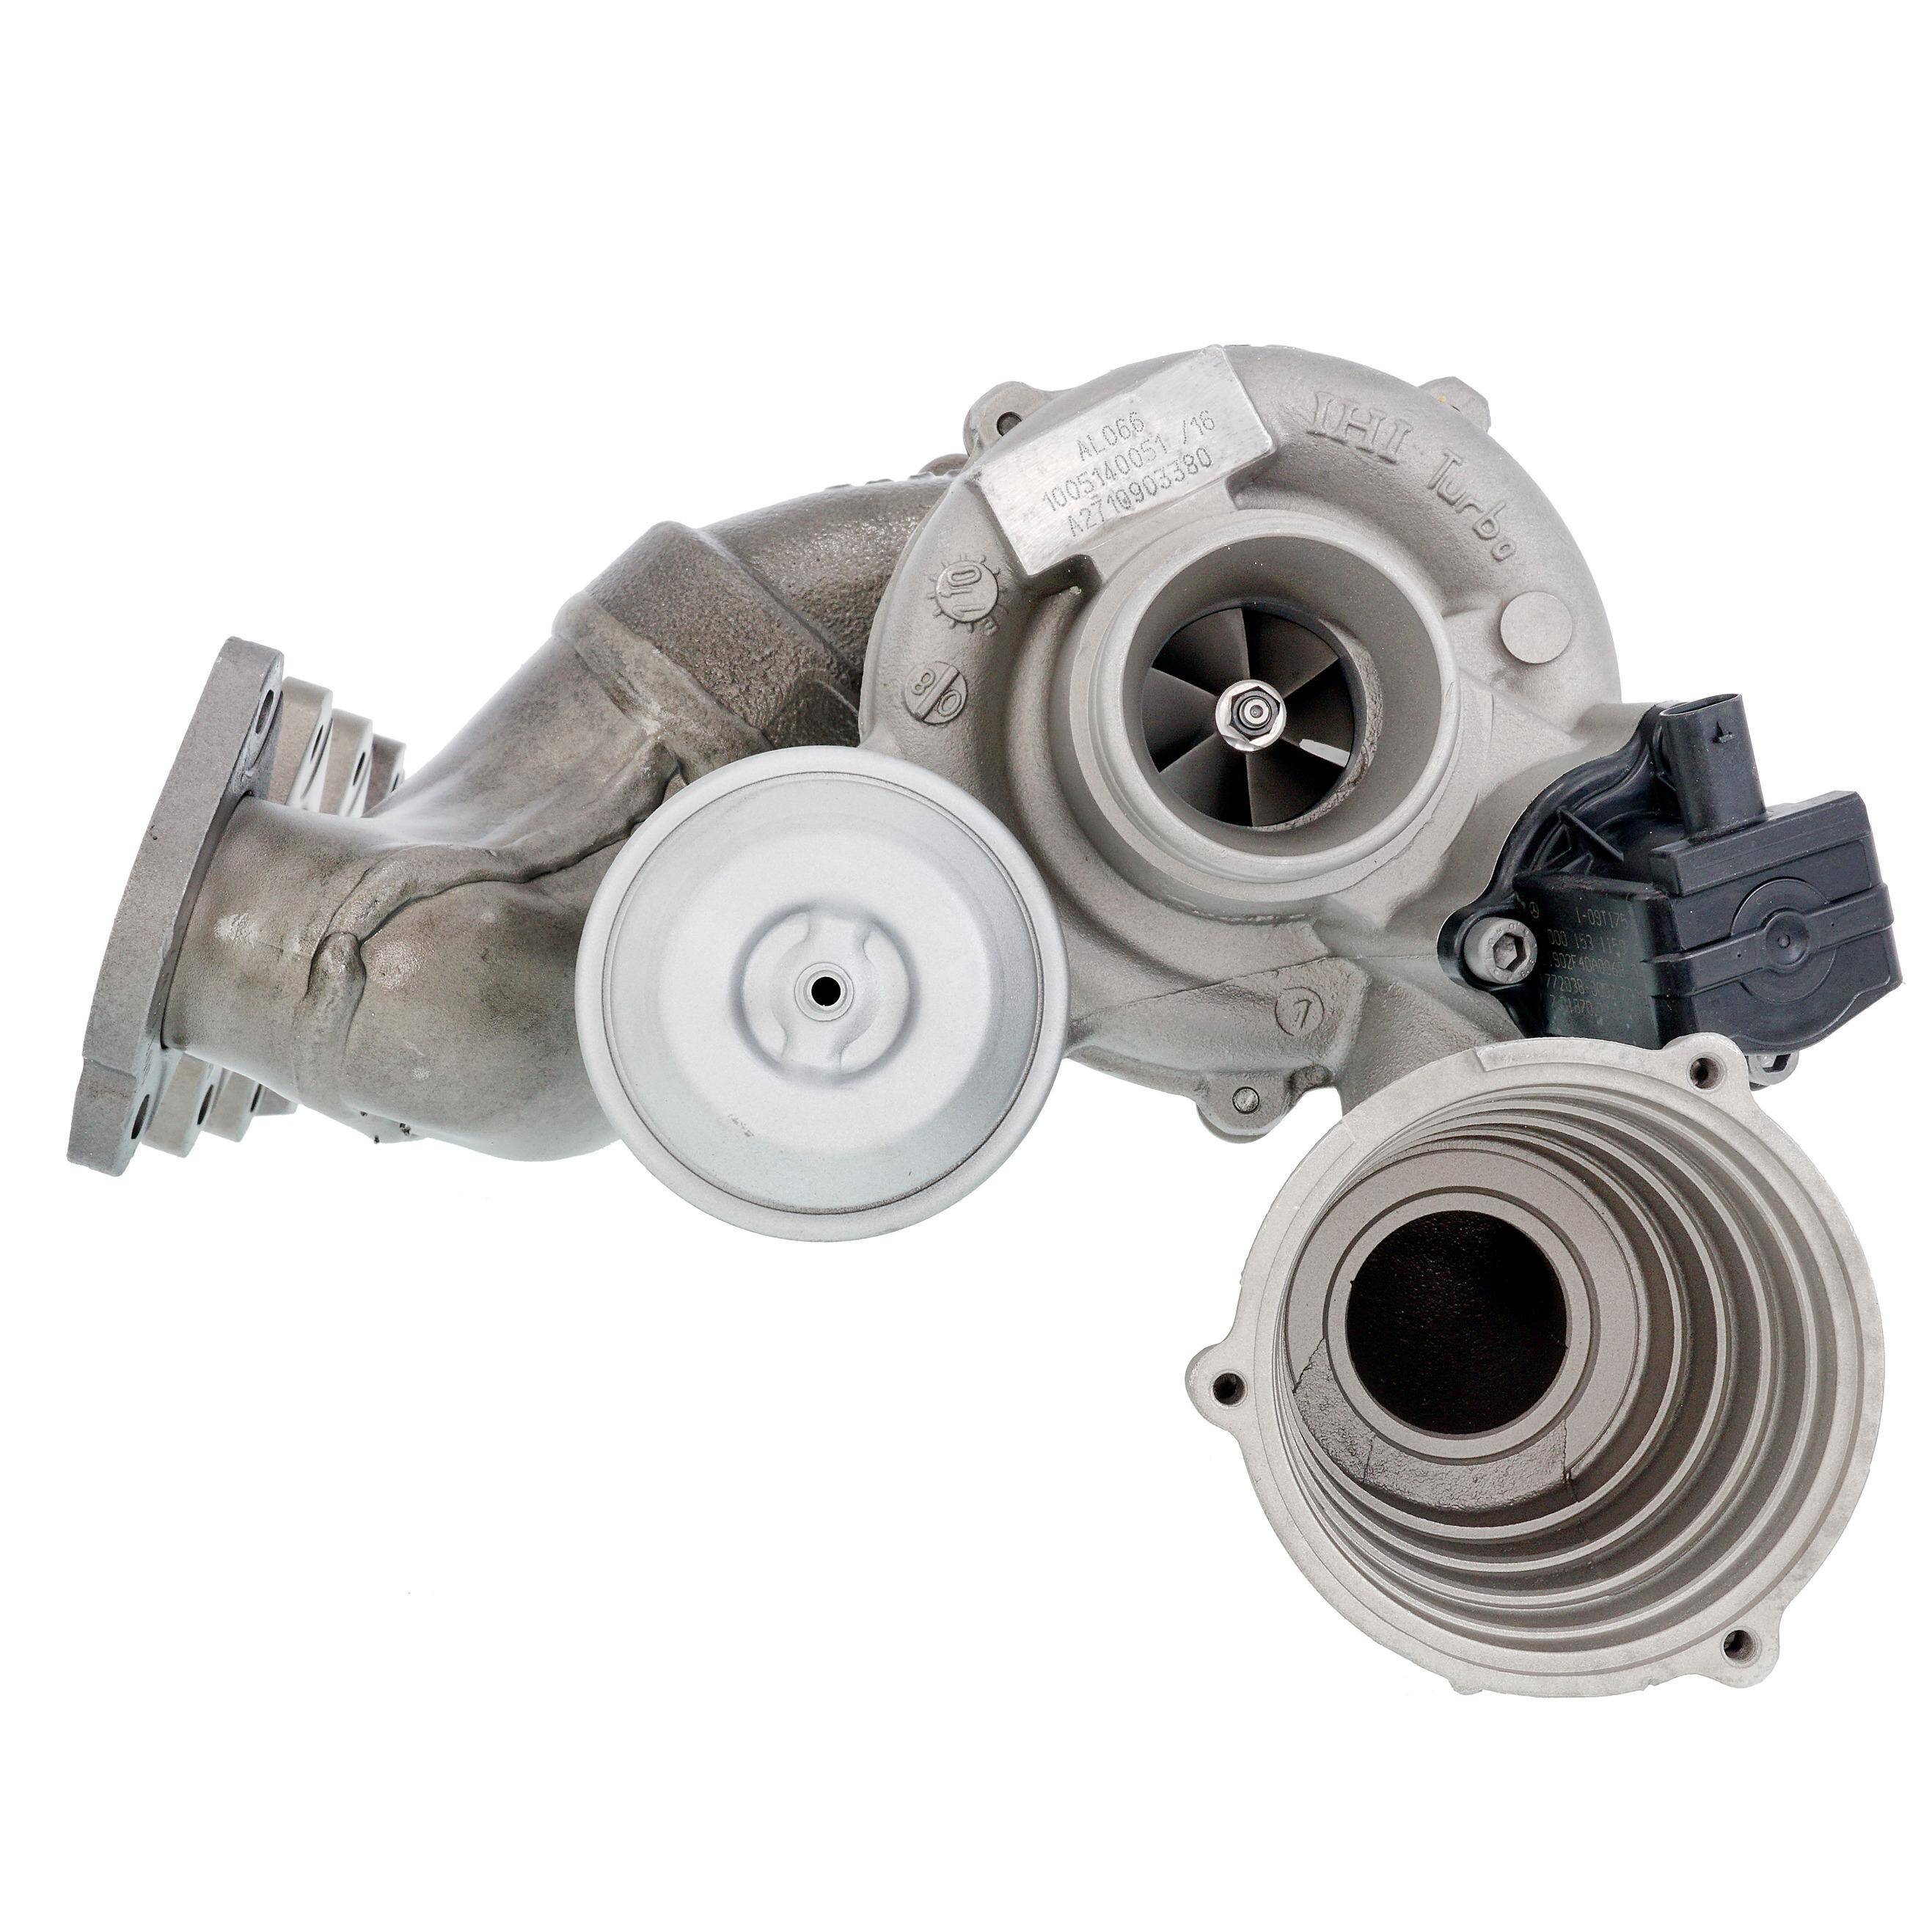 TURBOCHARGER TURBO REMANUFACTURED A2710903380 A2710903180 A2710903380